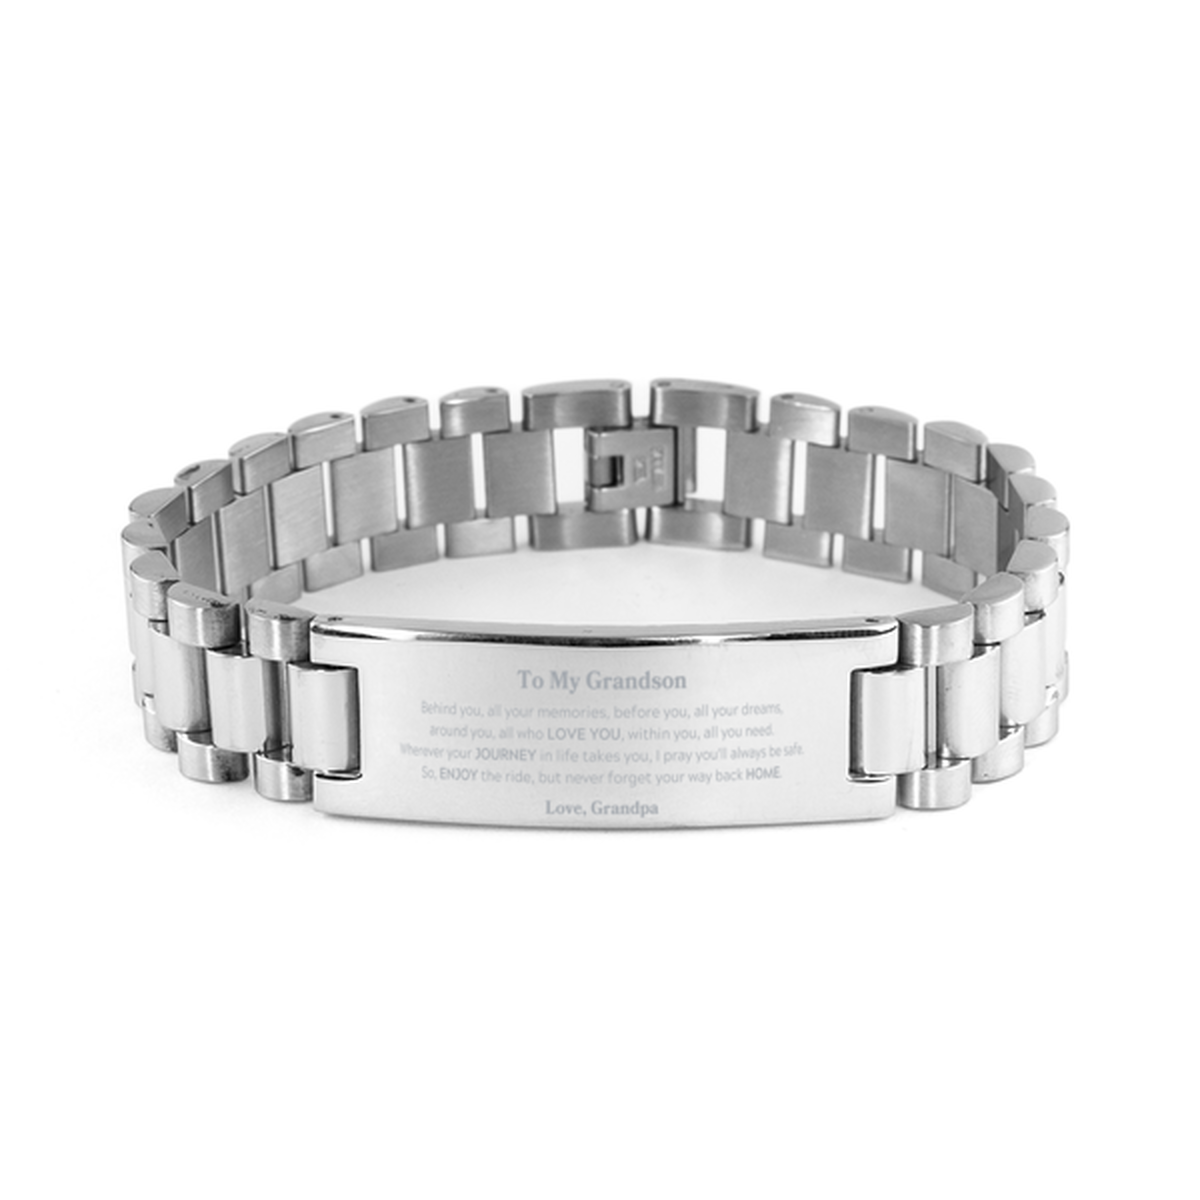 To My Grandson Graduation Gifts from Grandpa, Grandson Ladder Stainless Steel Bracelet Christmas Birthday Gifts for Grandson Behind you, all your memories, before you, all your dreams. Love, Grandpa